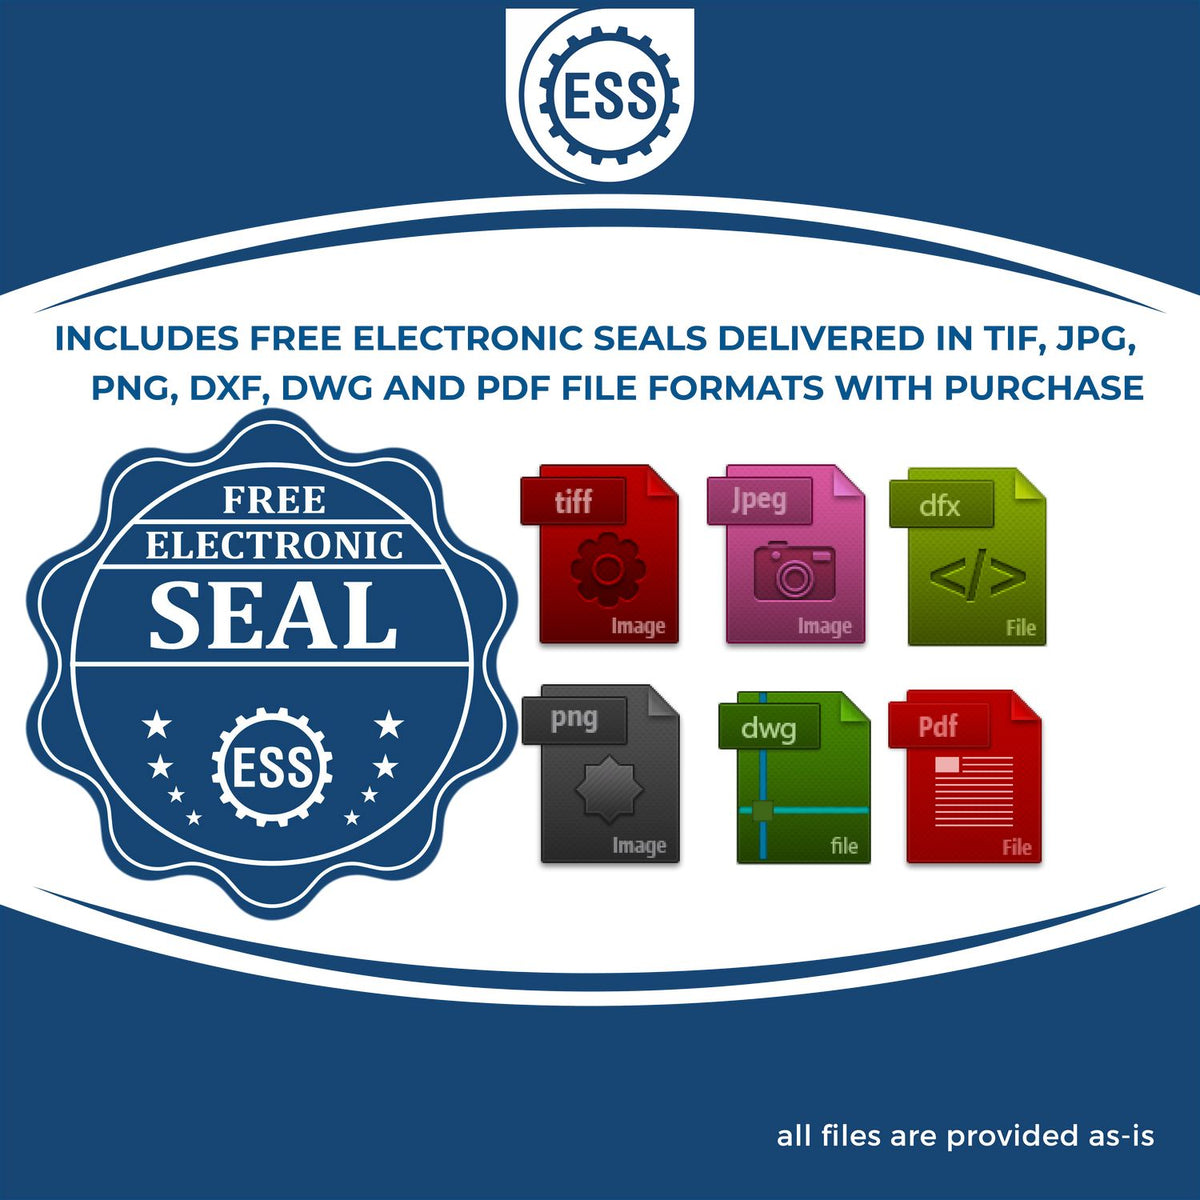 An infographic for the free electronic seal for the Premium MaxLight Pre-Inked New Mexico Landscape Architectural Stamp illustrating the different file type icons such as DXF, DWG, TIF, JPG and PNG.